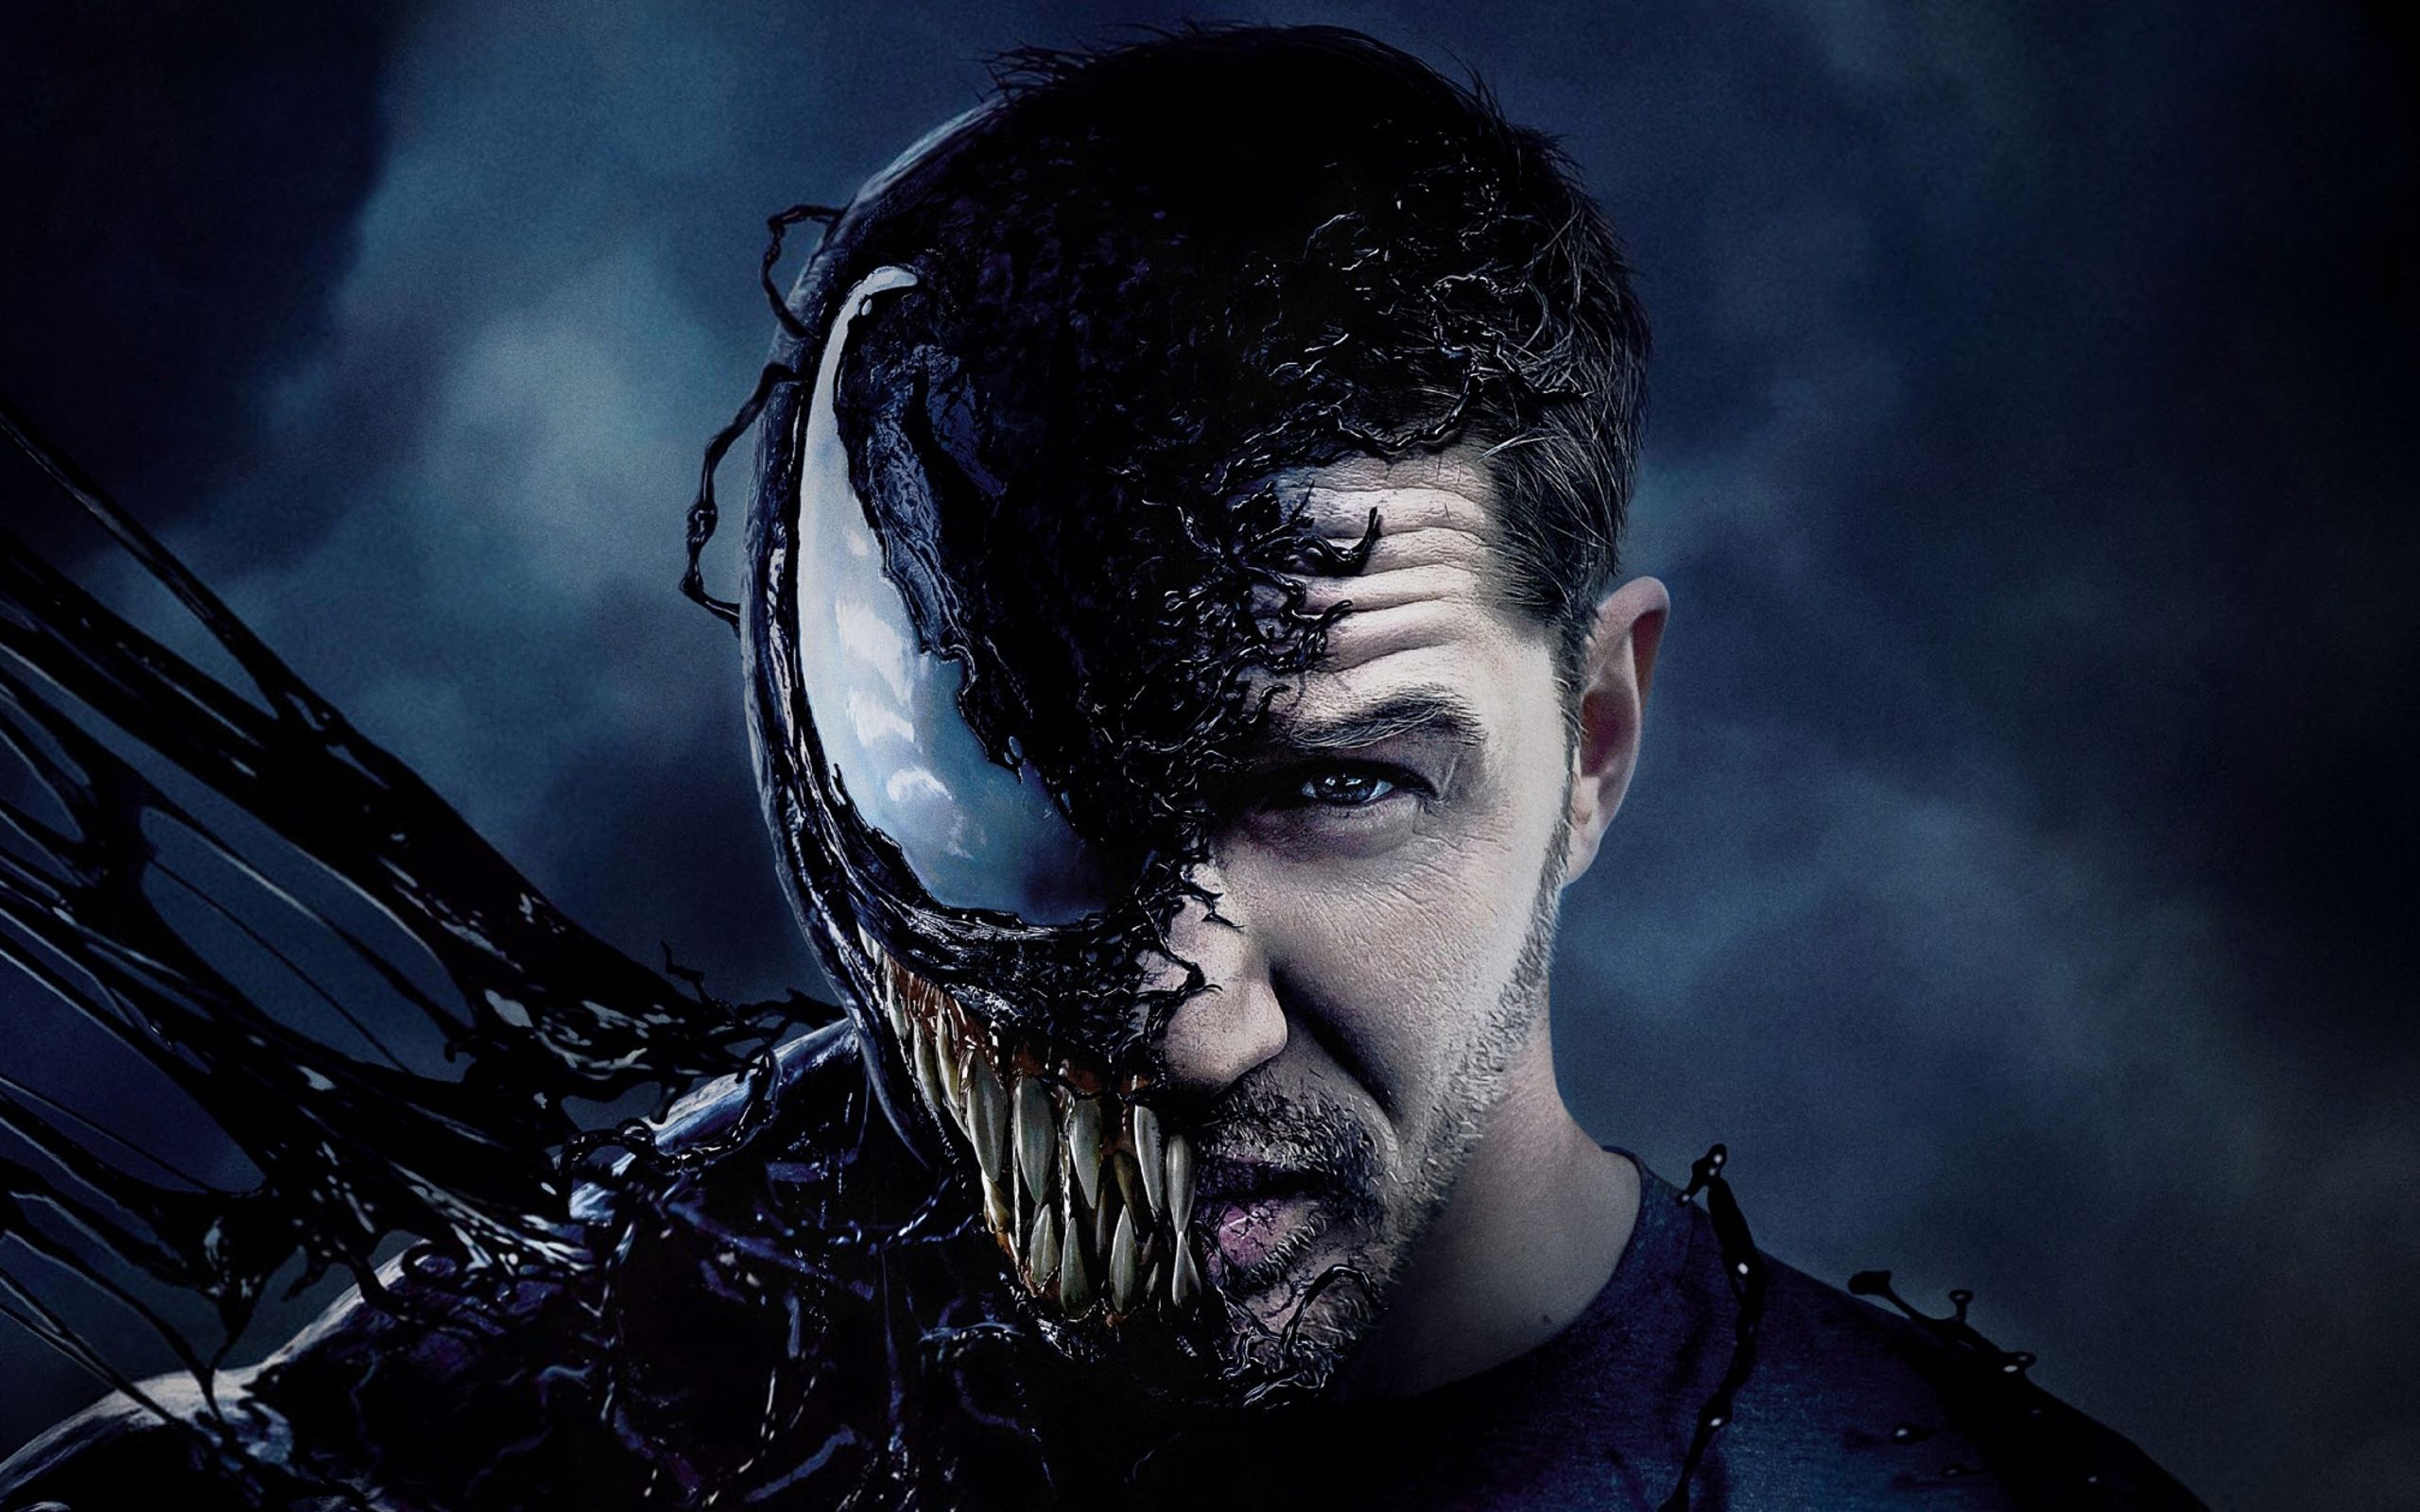 Venom Movie Fan Made Art Samsung Galaxy Note 9 8 S iPhone Wallpapers  Free Download